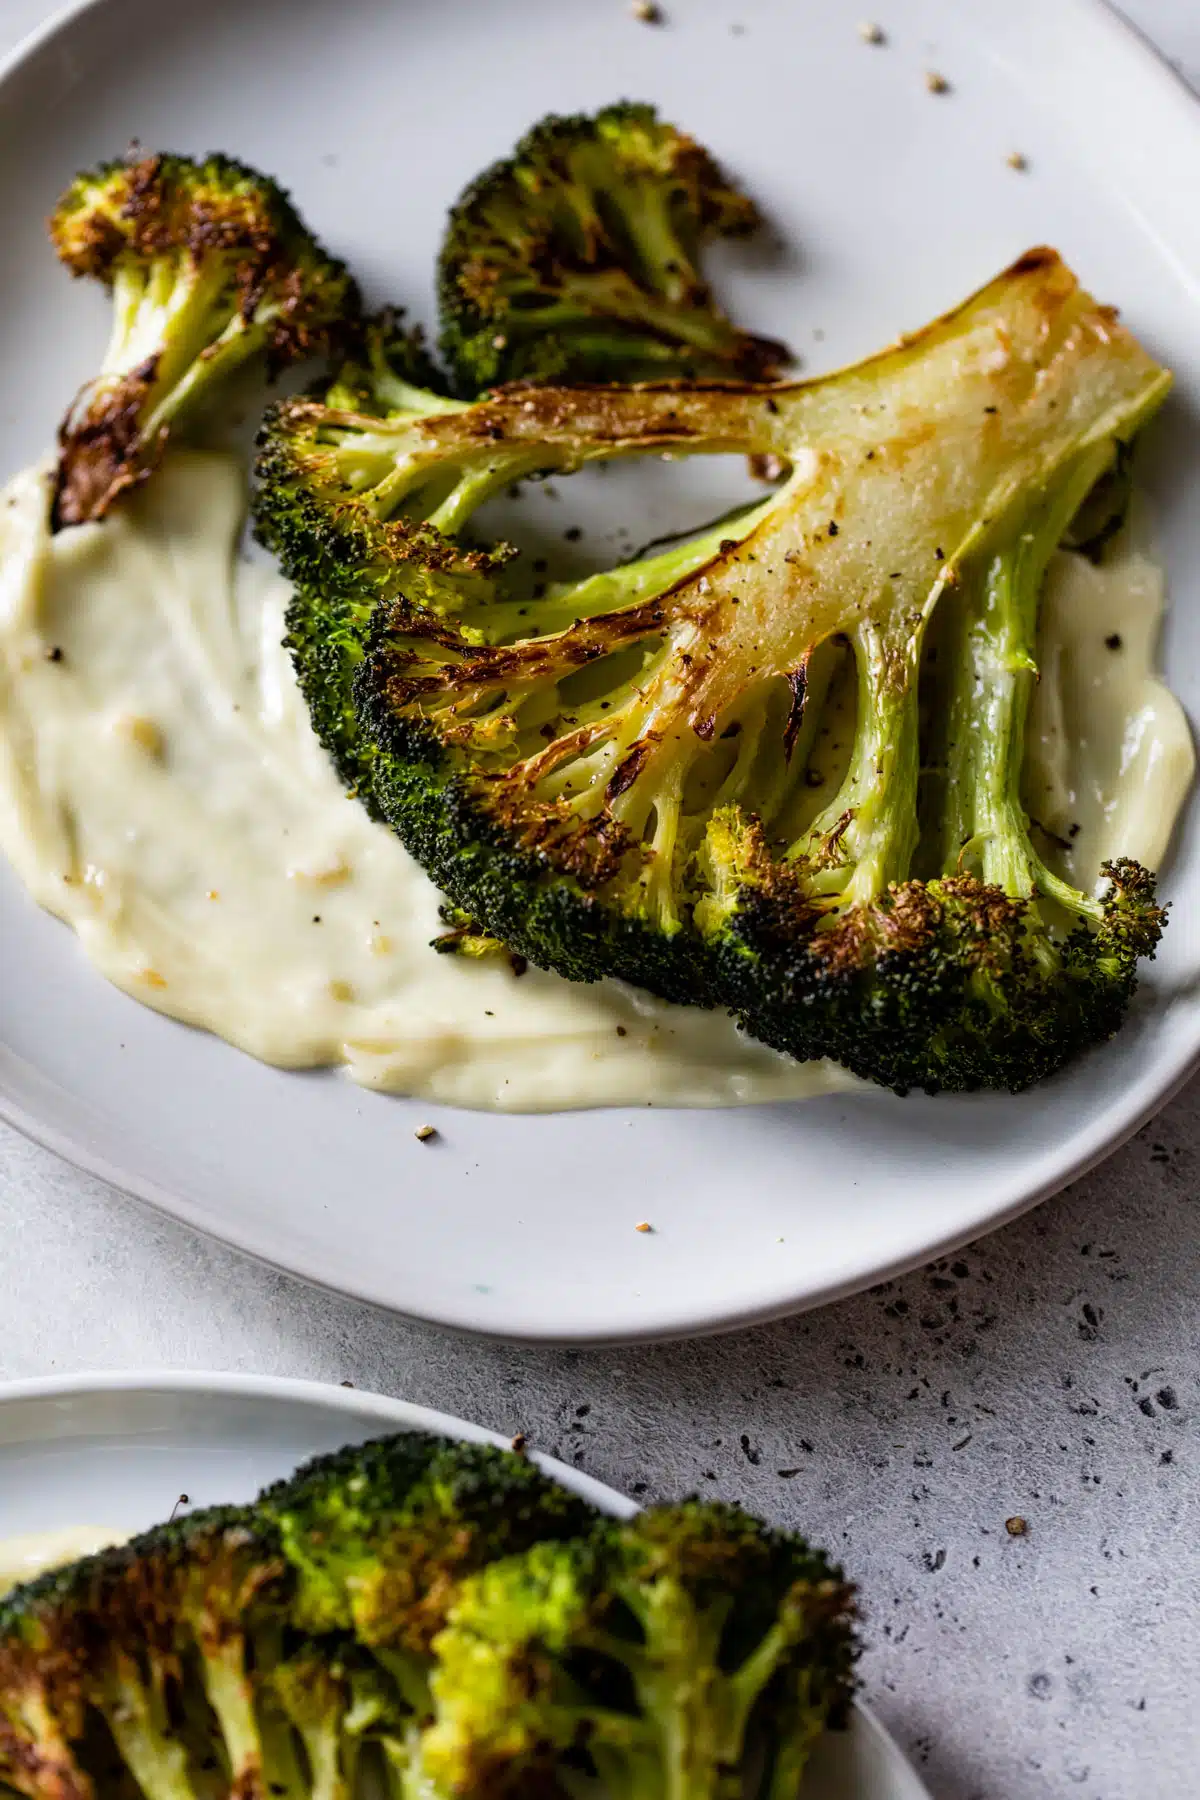 roasted broccoli crown on a plate with some aioli spread